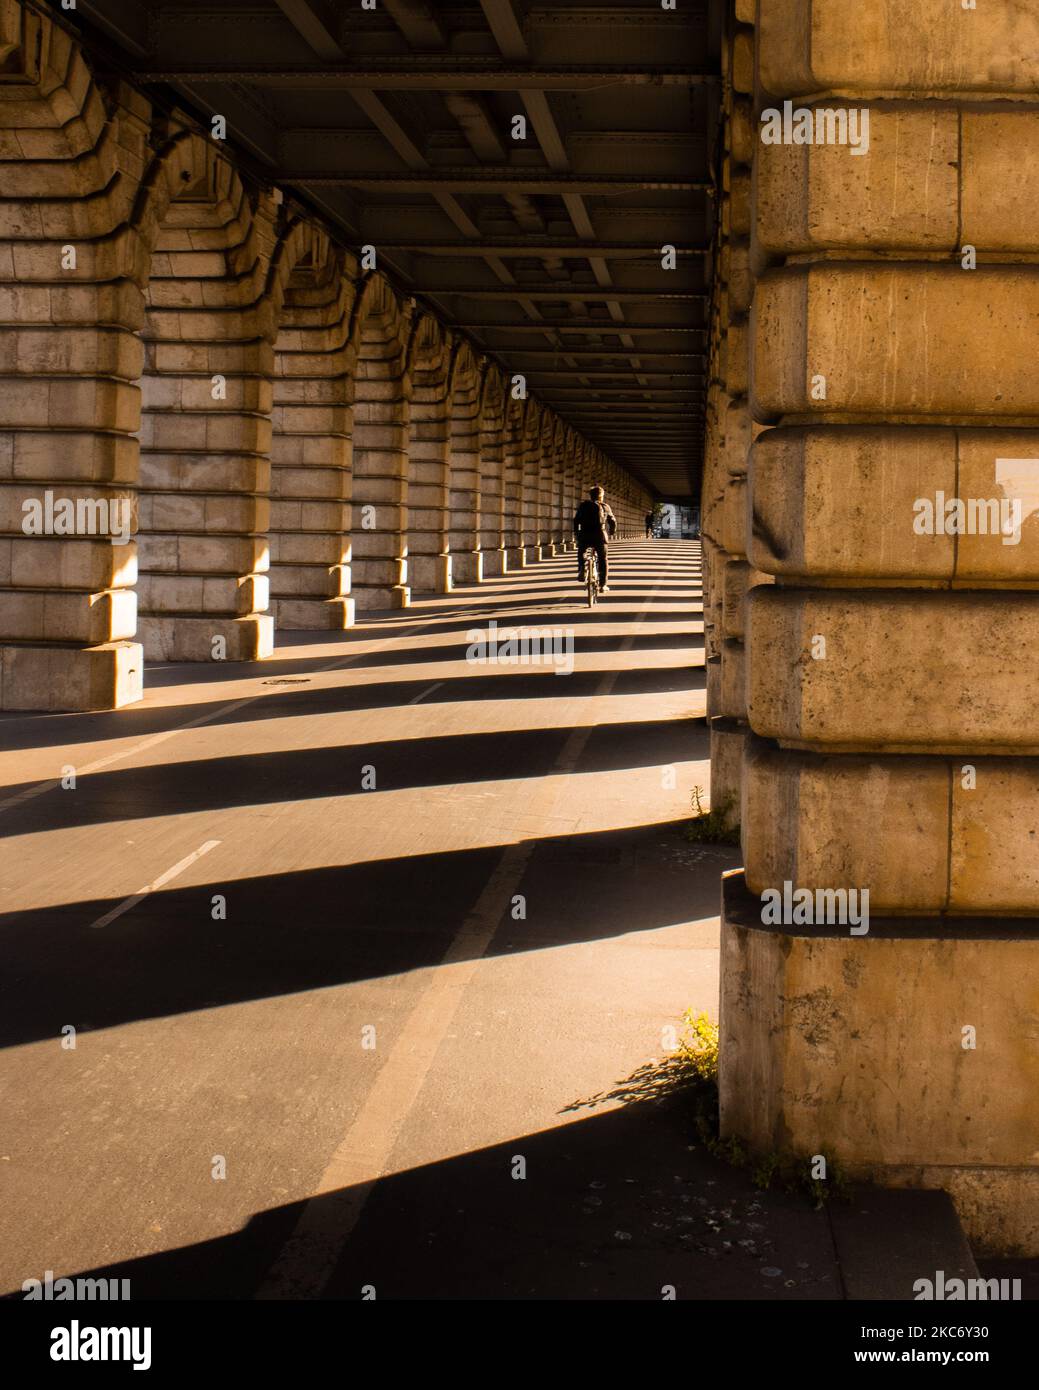 A person cycling under a bridge with columns in Paris in the shadows Stock Photo